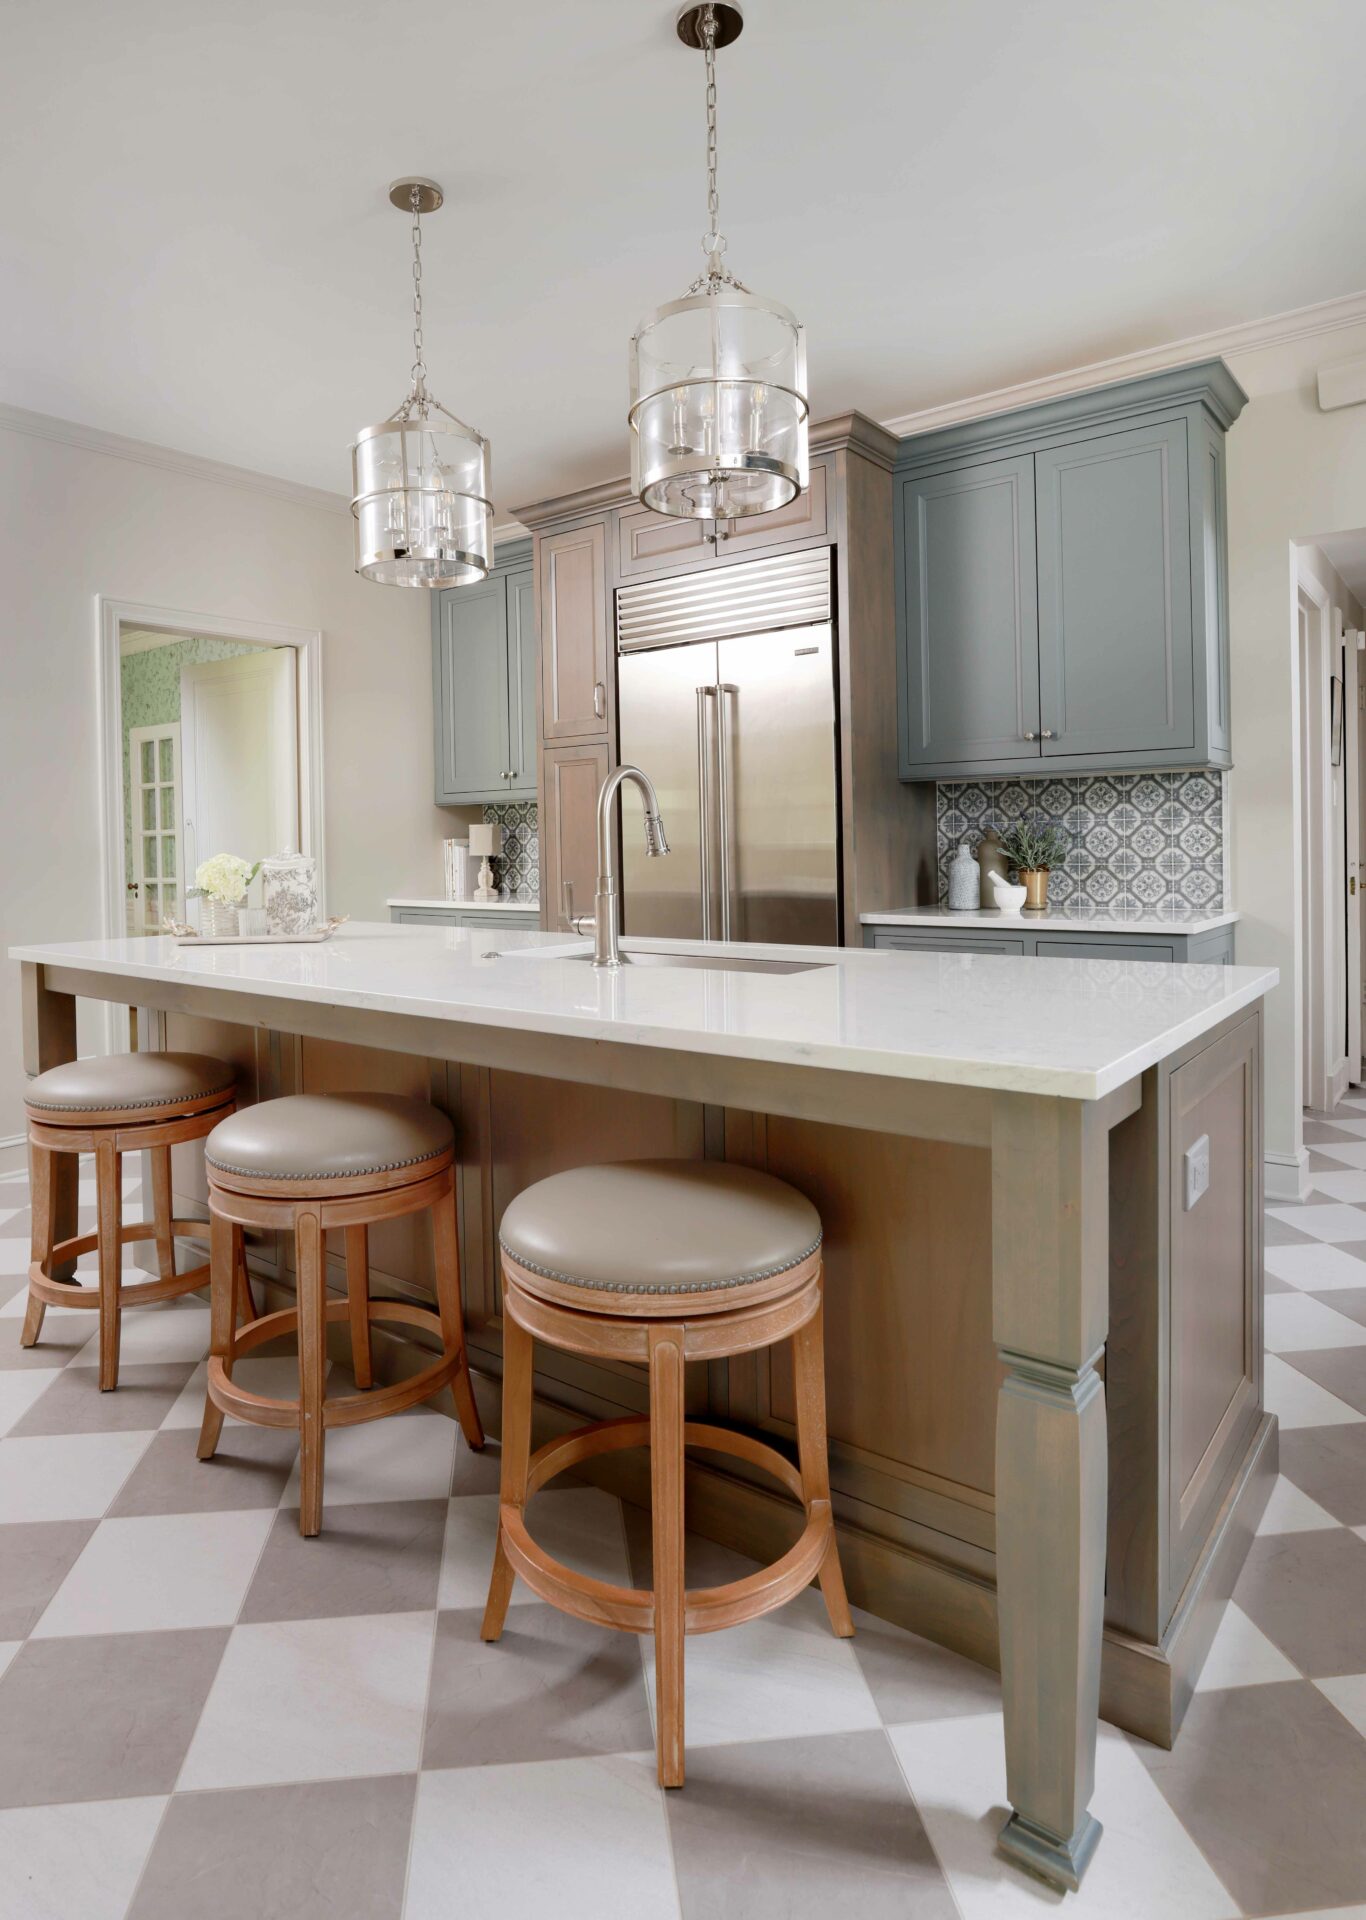 Kitchen island with stained cabinetry and perimeter kitchen cabinets painted gray